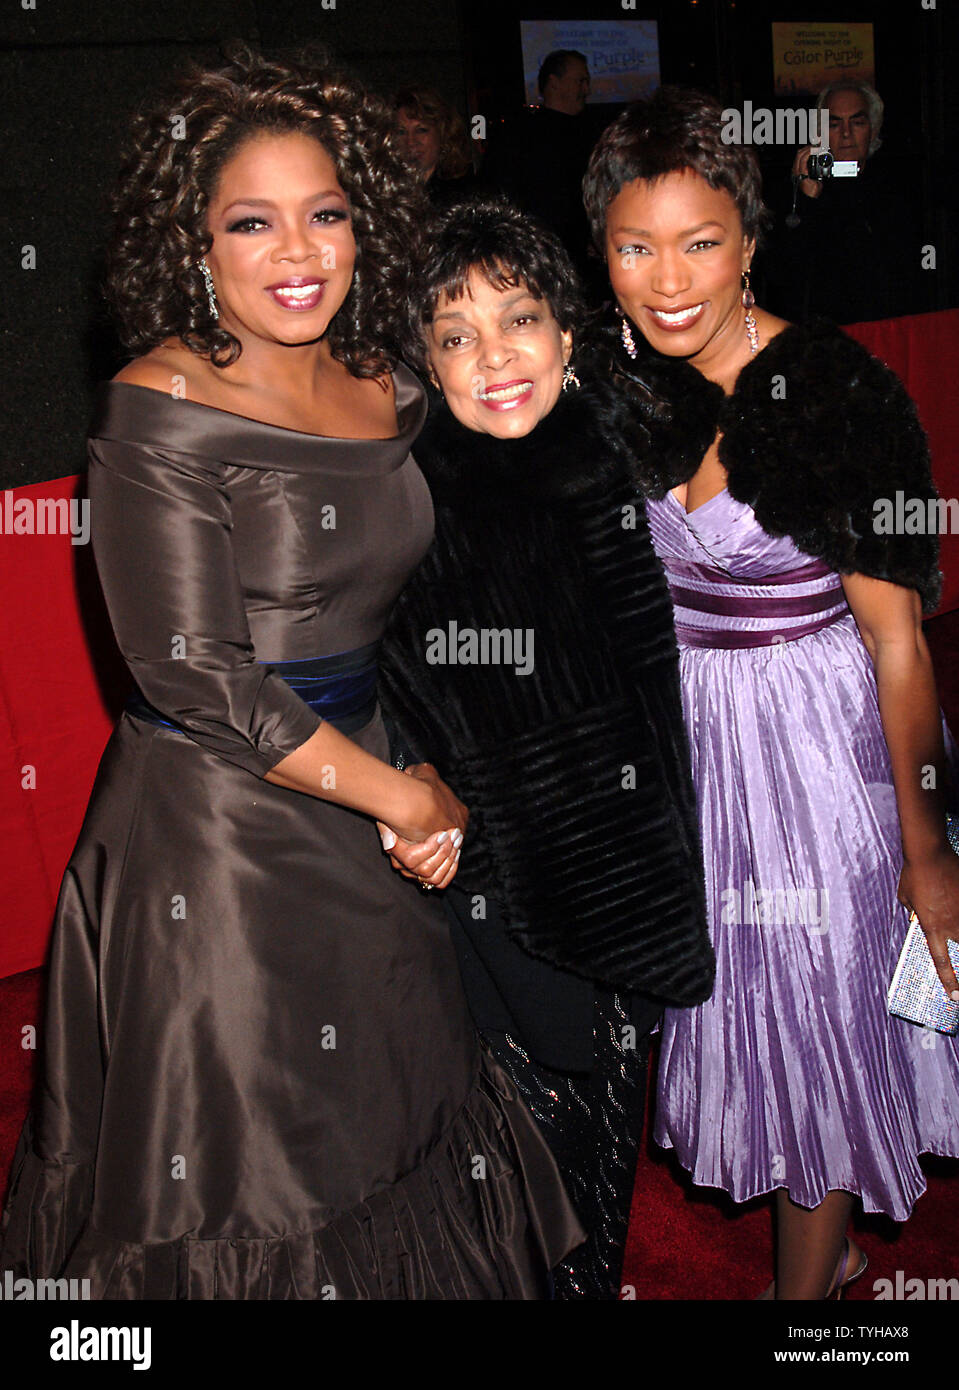 TV talk show host Oprah Winfrey (left) poses with actresses Ruby Dee and  Angela Bassett (right) at the Broadway theatre on December 1, 2005 for the  opening night performance of the Broadway